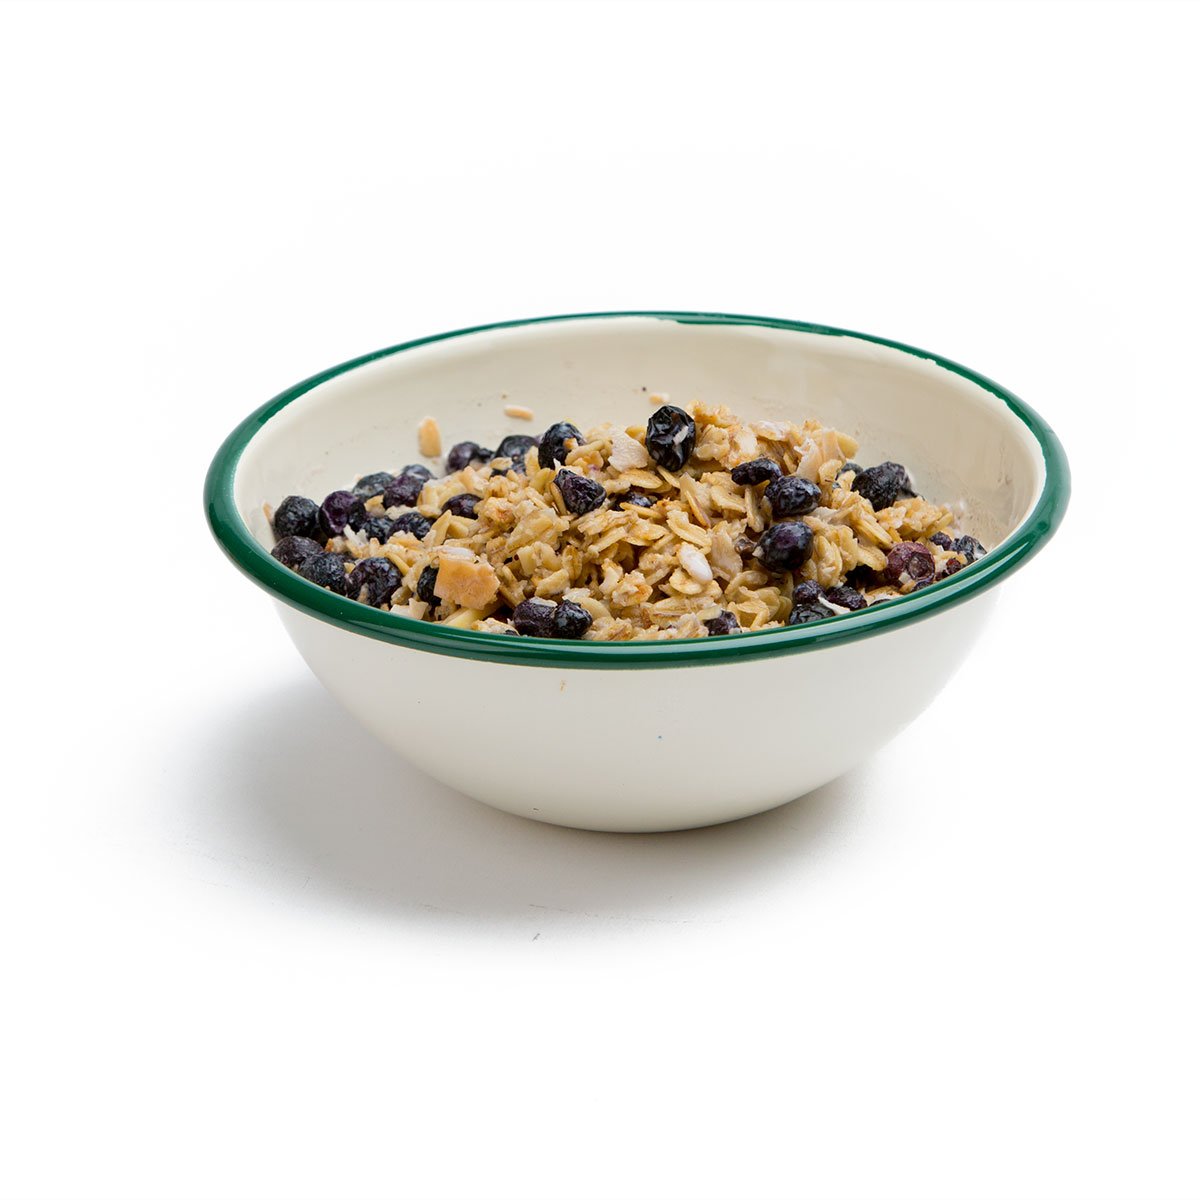 Granola with Blueberries, Almonds and Milk: One Person